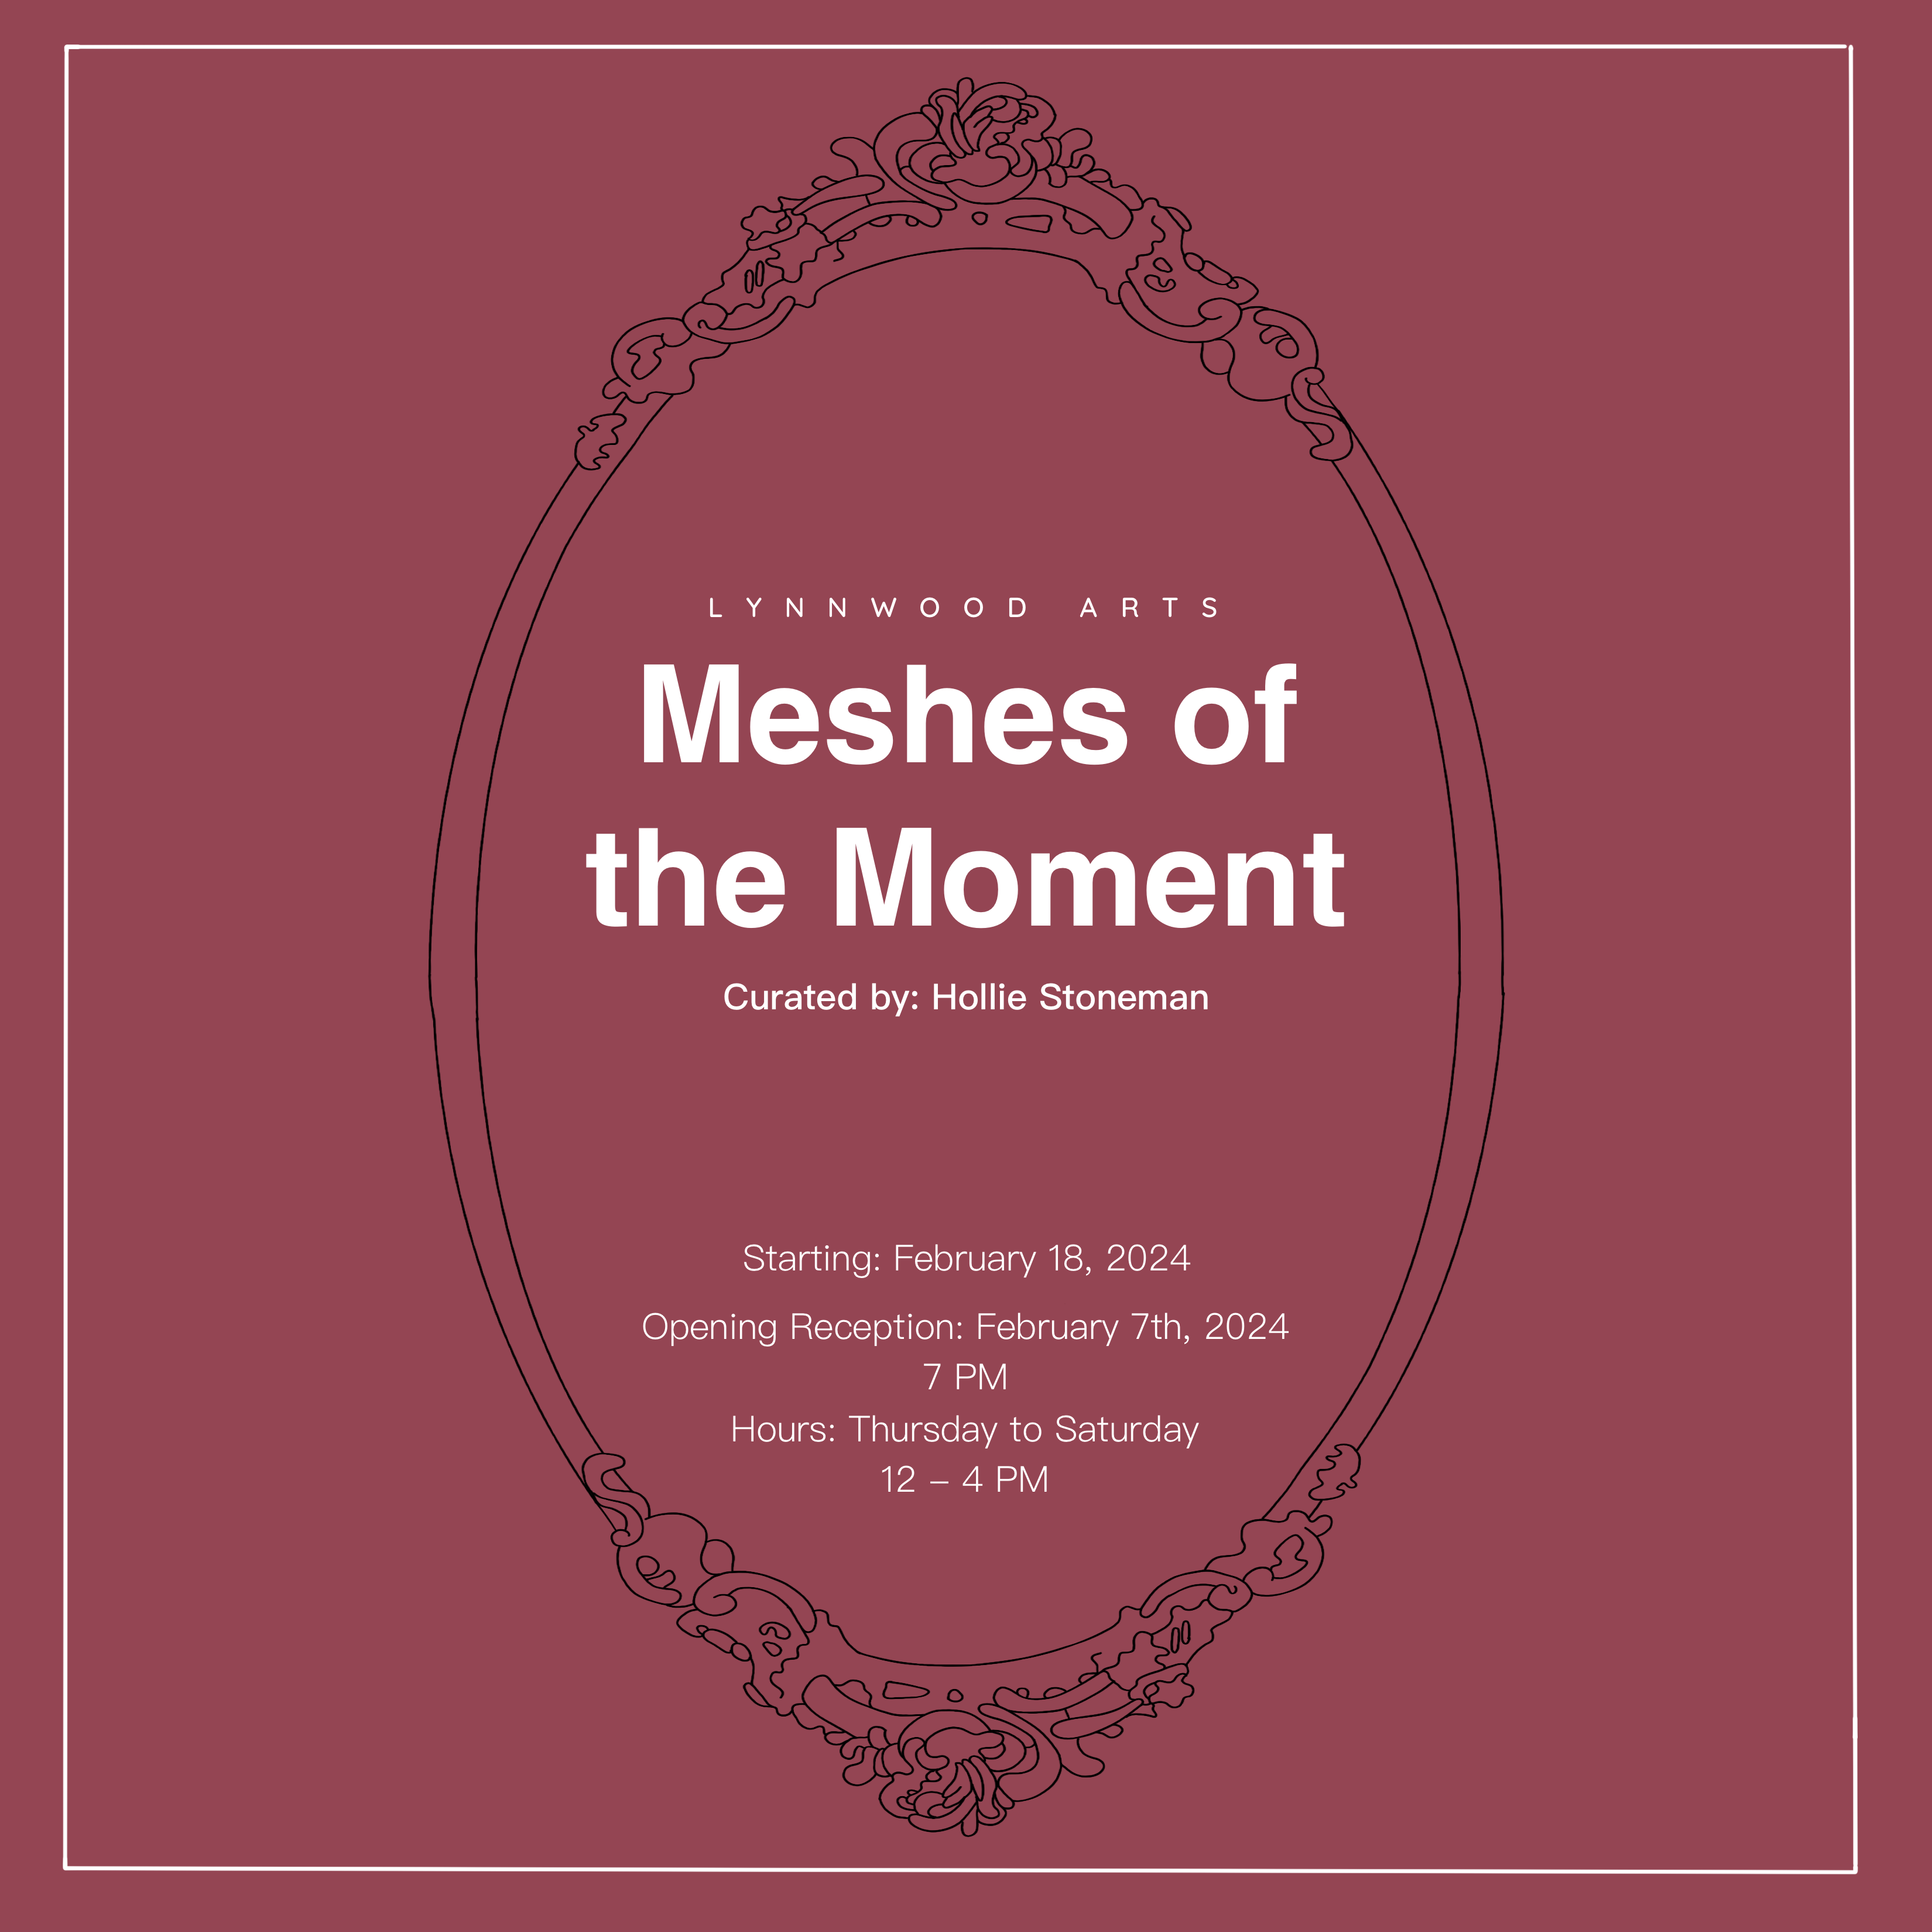 Meshes of the Moment